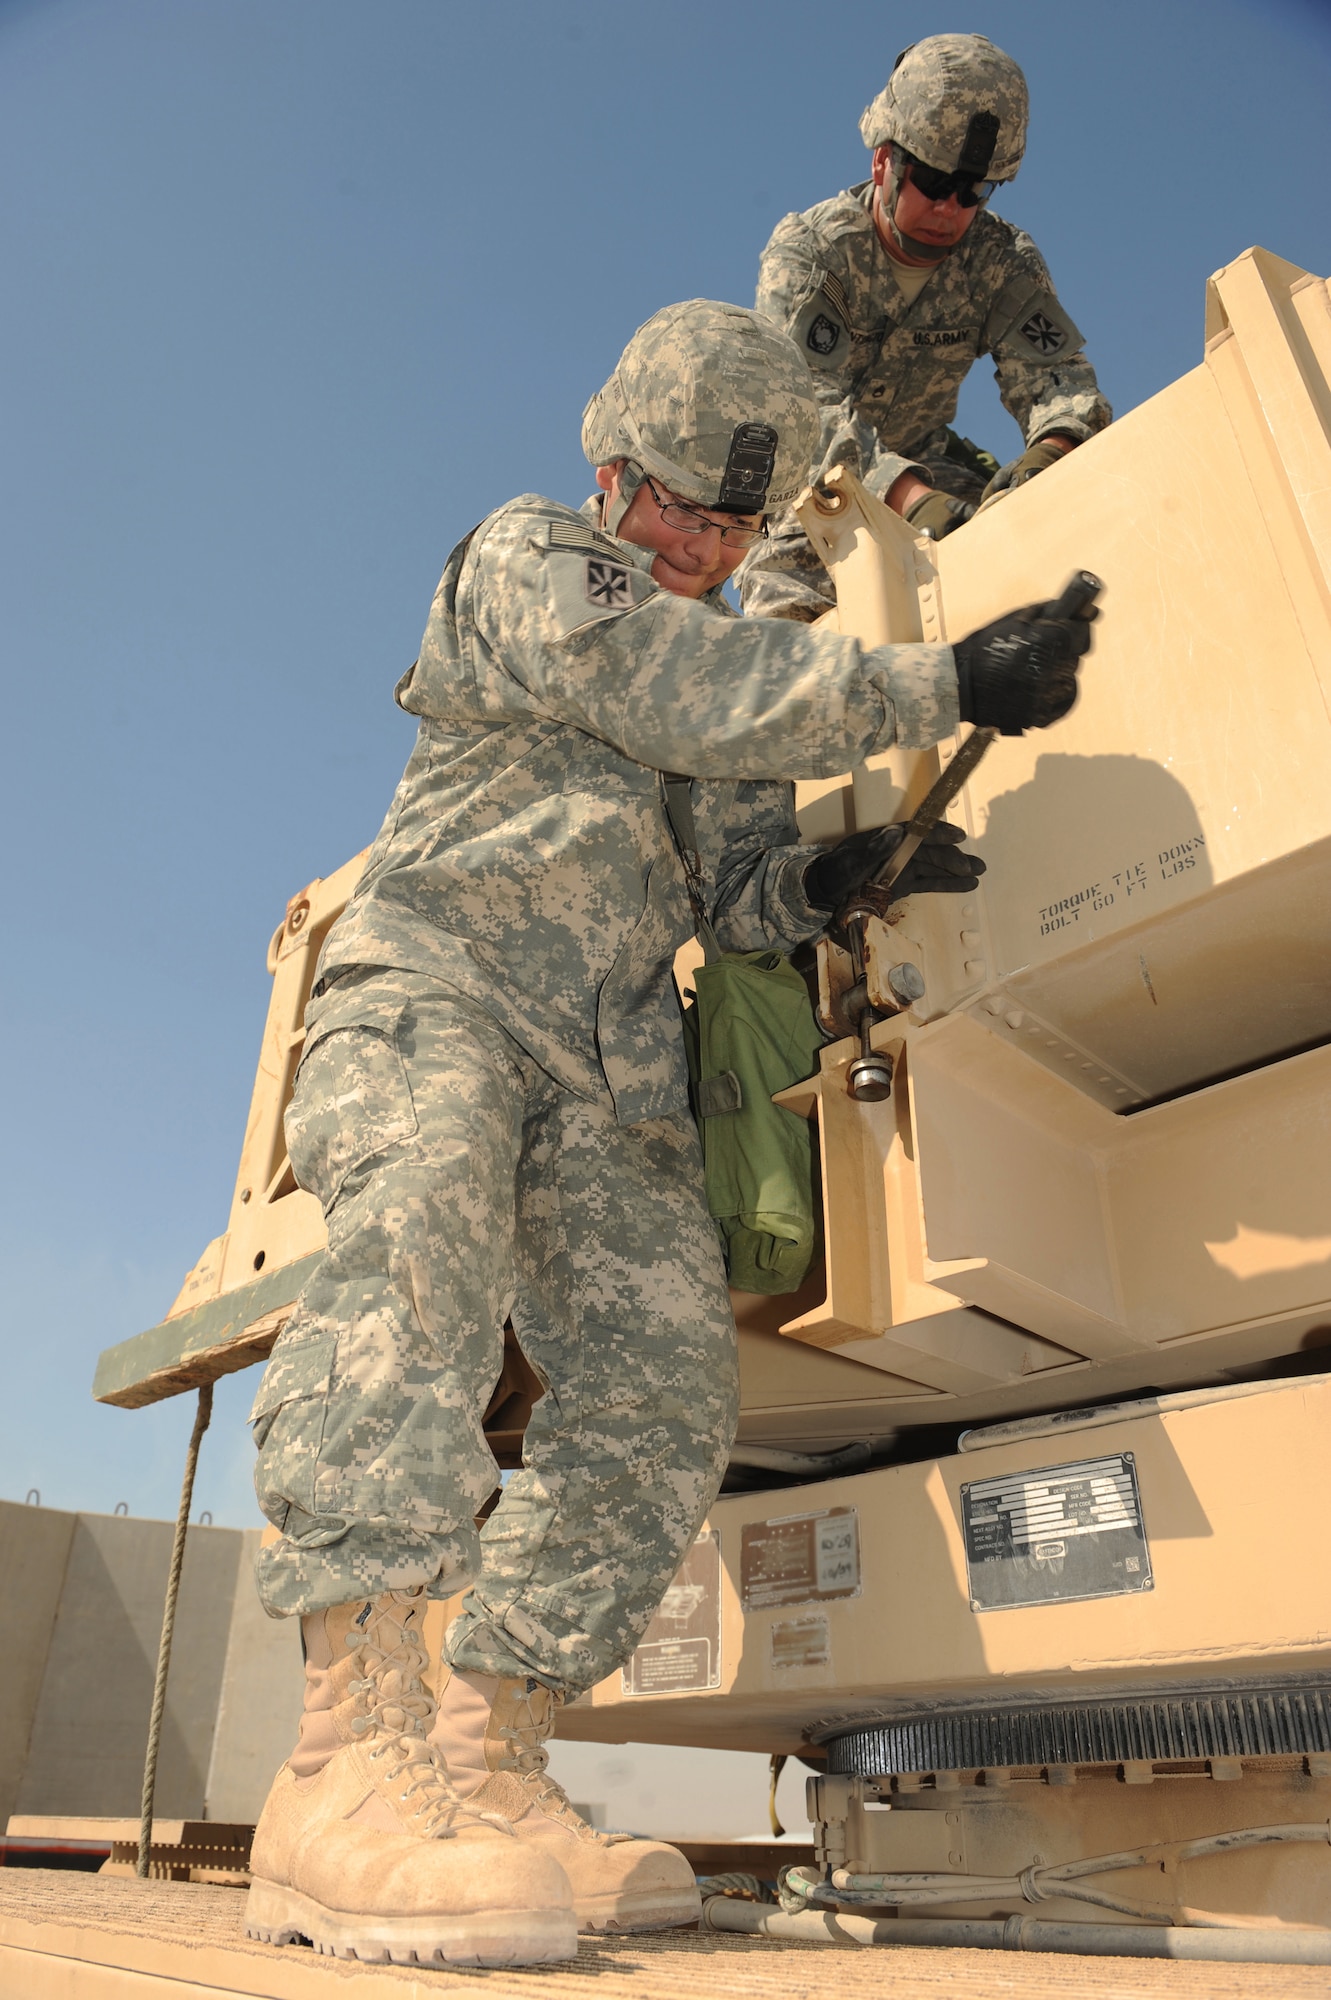 Army Staff Sgt. James Huntington, Bravo Battery, 1-43 Air Defense Artiller,y Patriot Launch Station operator/maintainer, unhooks canister beam chains from a missile canister as Spc. Alarick Garza, Bravo Battery, 1-43 ADA, Patriot Launch Station operator/maintainer, torques the canister onto a Patriot missle launcher during a guided-missile transporter reload certification activity at a non-disclosed Southwest Asia location, Feb. 12, 2010. (U.S. Air Force photo by Tech. Sgt. Michelle Larche)[RELEASED]